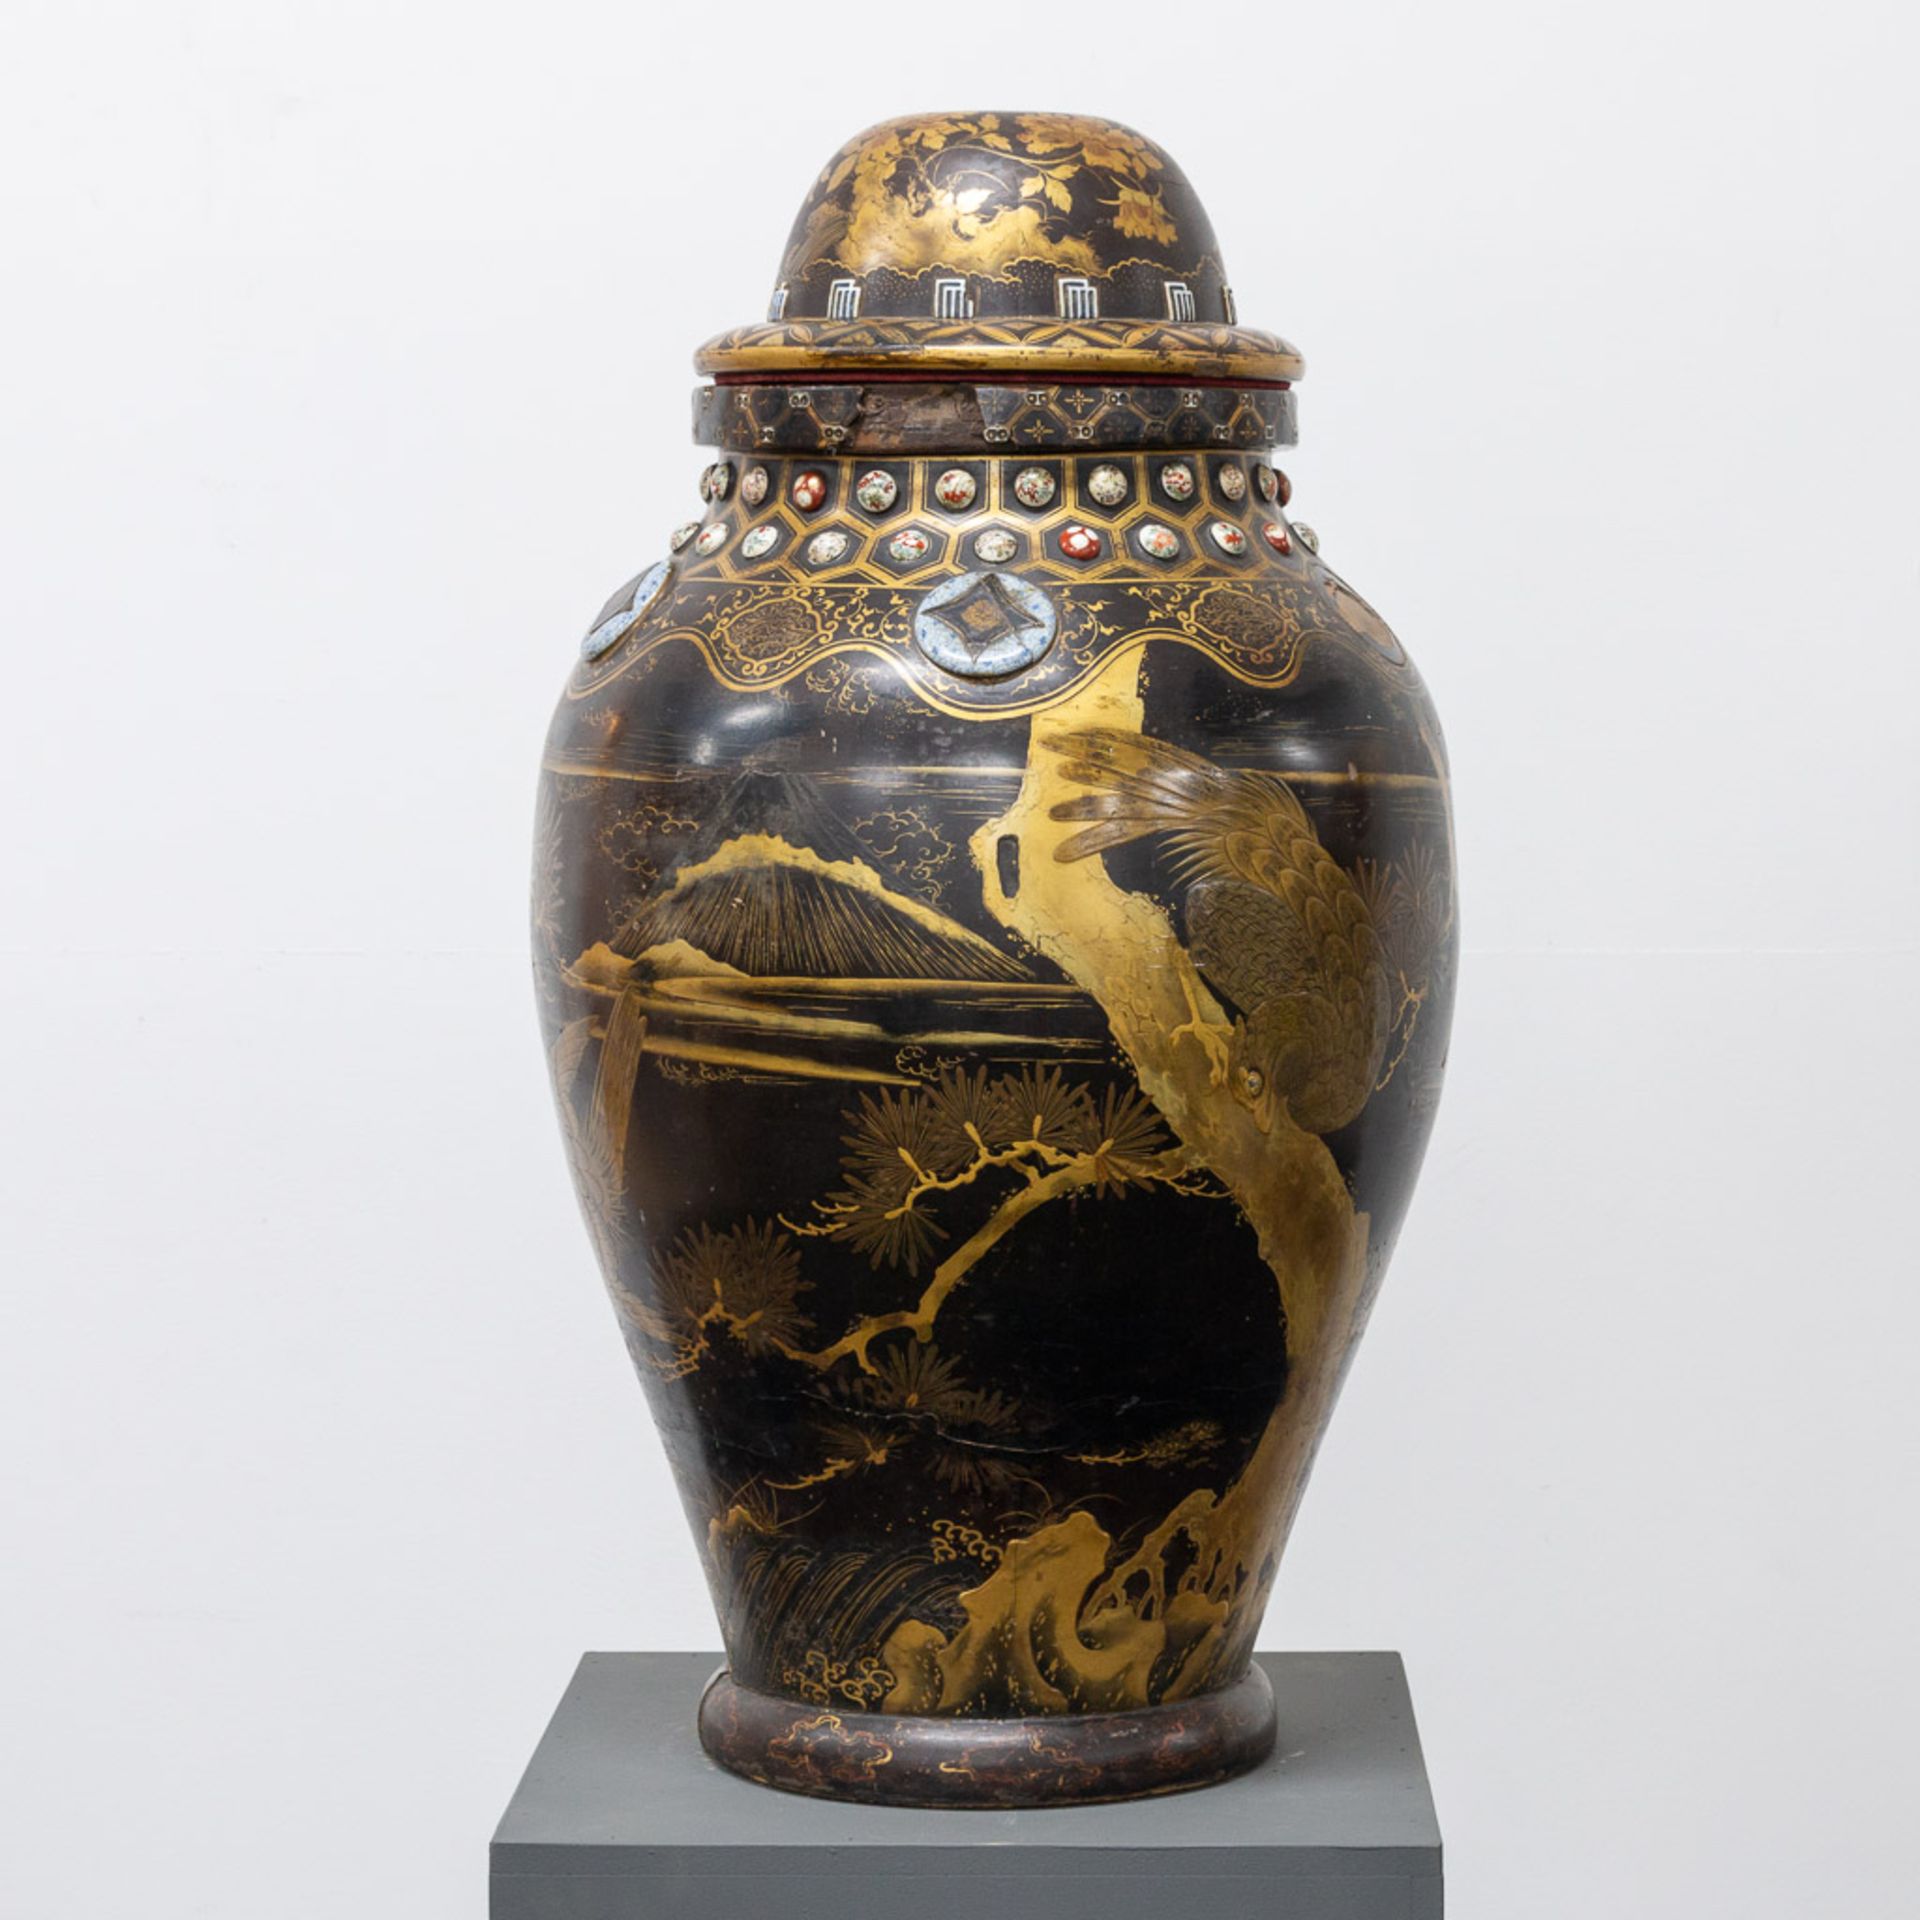 A large Japanese display vase, made of terracotta combined with wood. - Image 2 of 38